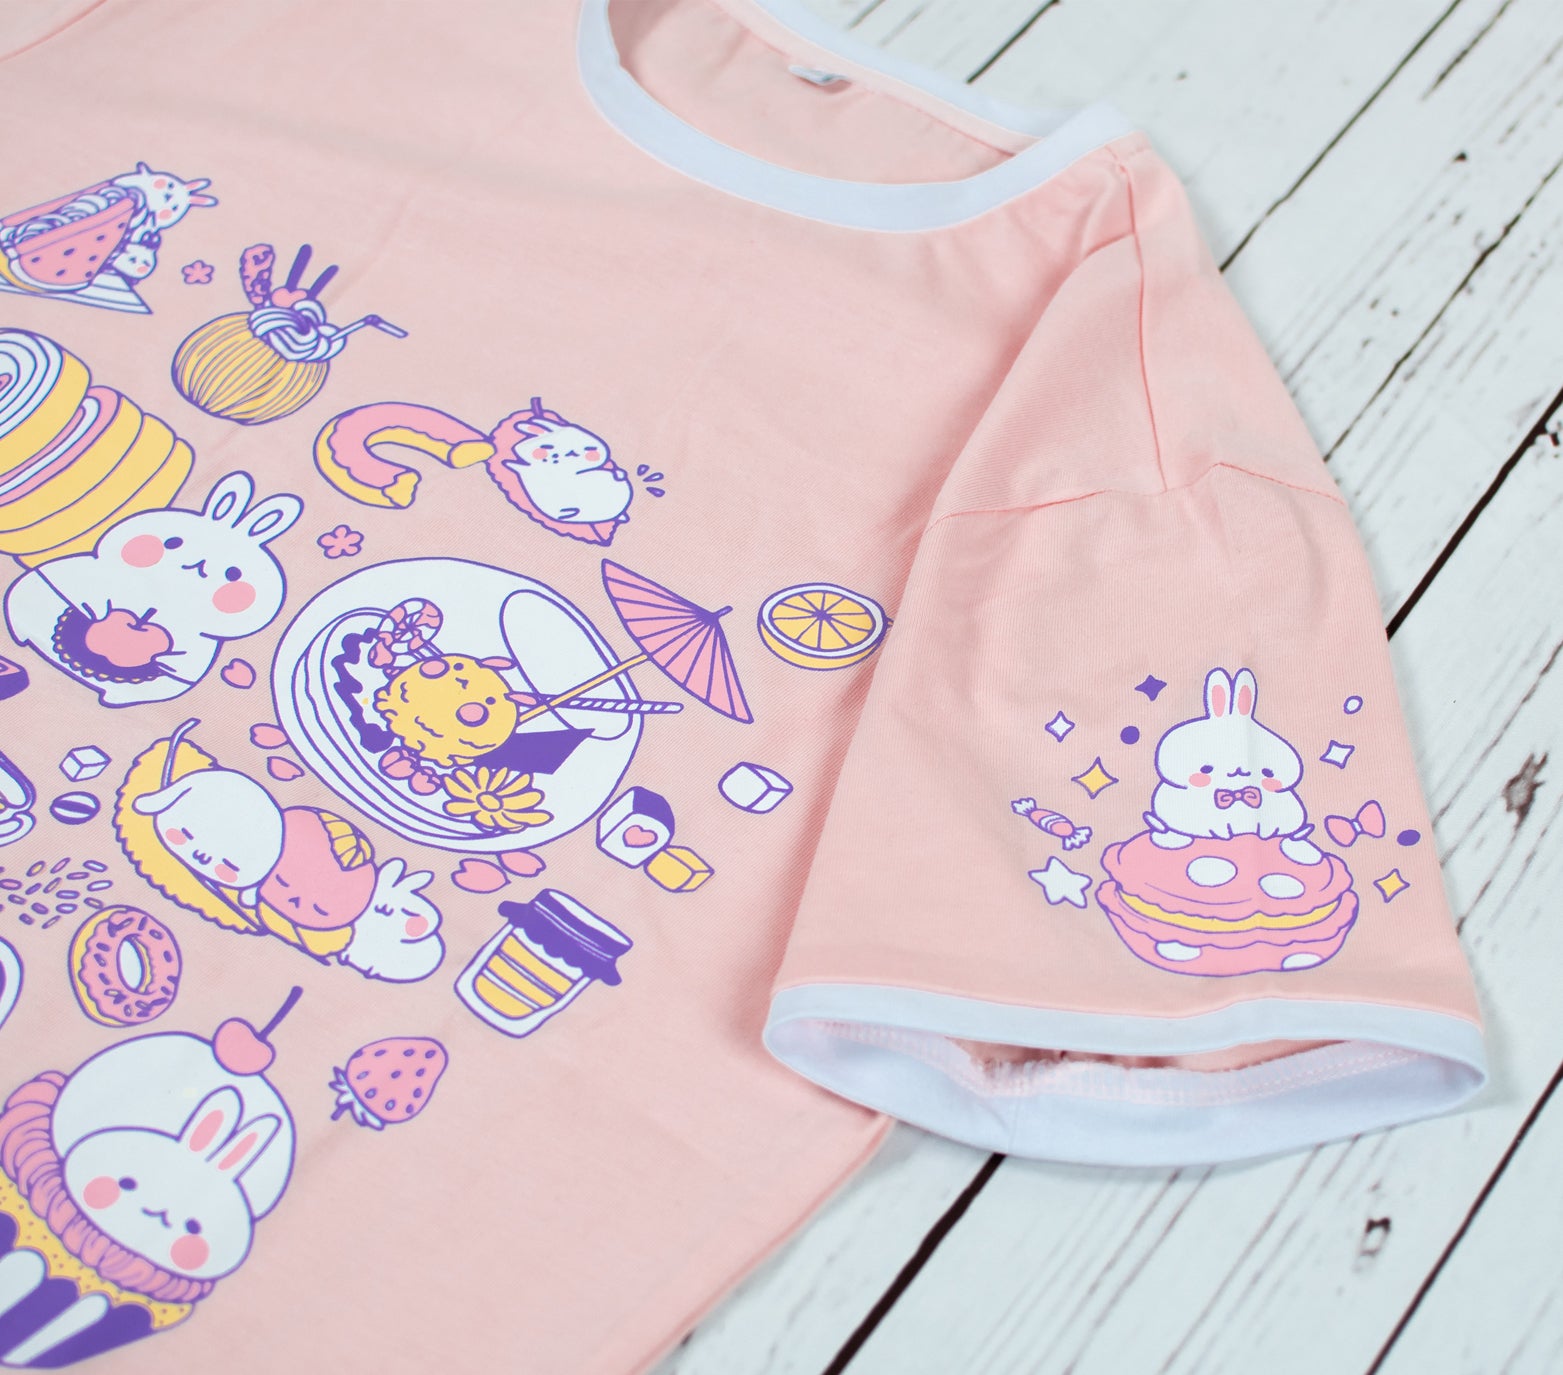 Light peach pink bunny t-shirt showing sweet bunny chefs making baking and café goods such as sweets, drinks, and desserts. The left sleeve of the shirt also shows a bunny sitting on a pink macraon. Light-weight and stretchable material that is made of 100% cotton. The collar and sleeve ends have cute white borders that truly frames the look of this summer shirt. Available in sizes XXS to 2XL.  